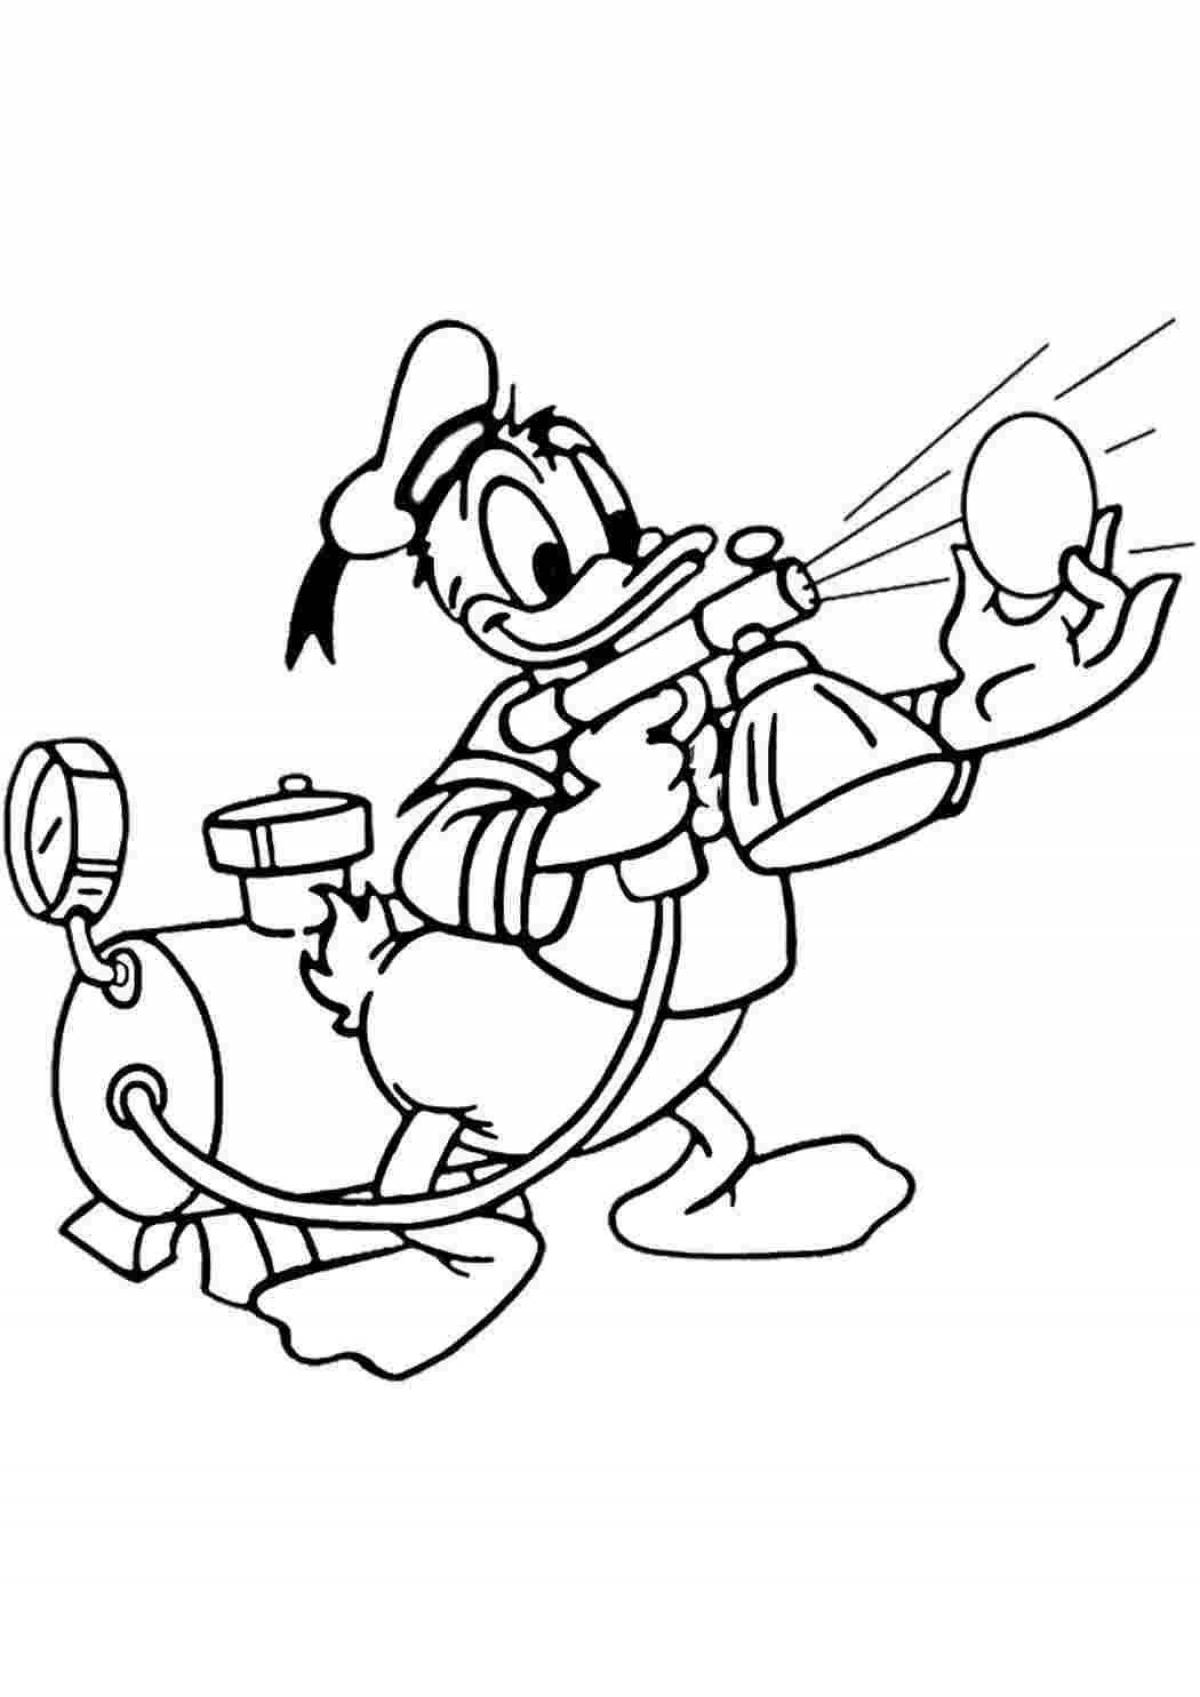 Luxury scrooge mcduck coloring pages with money